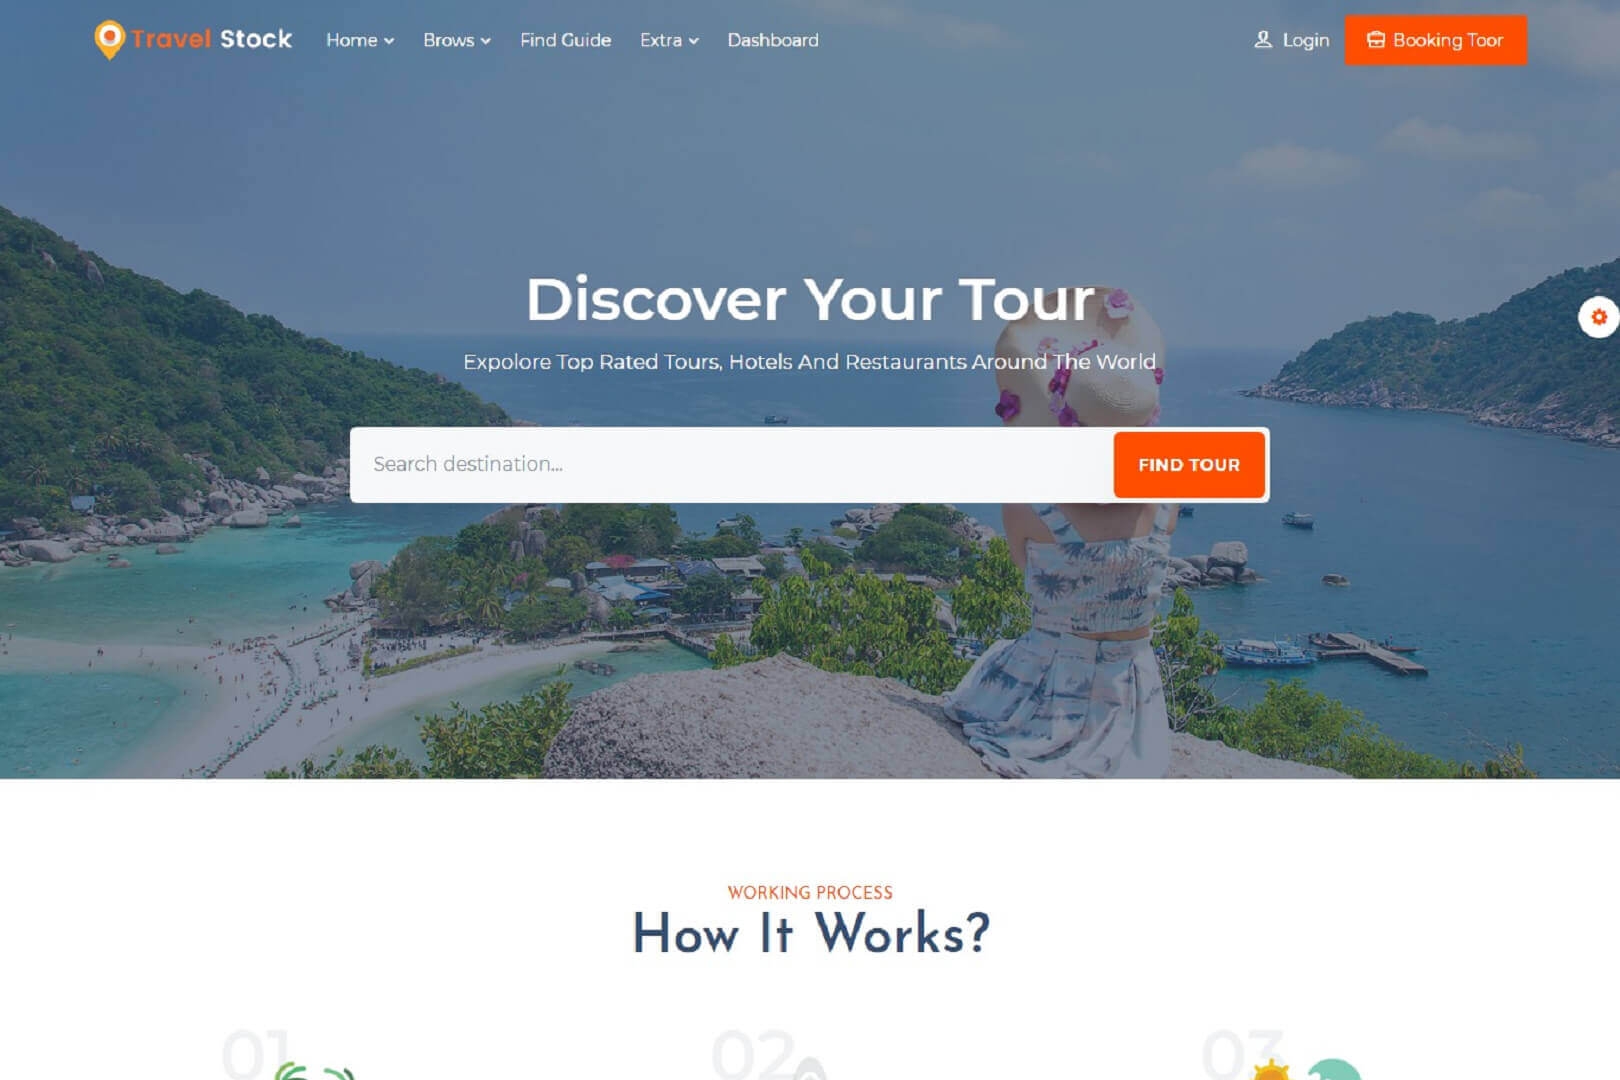 Travel Stock Creative Tour & Travel Agency Template